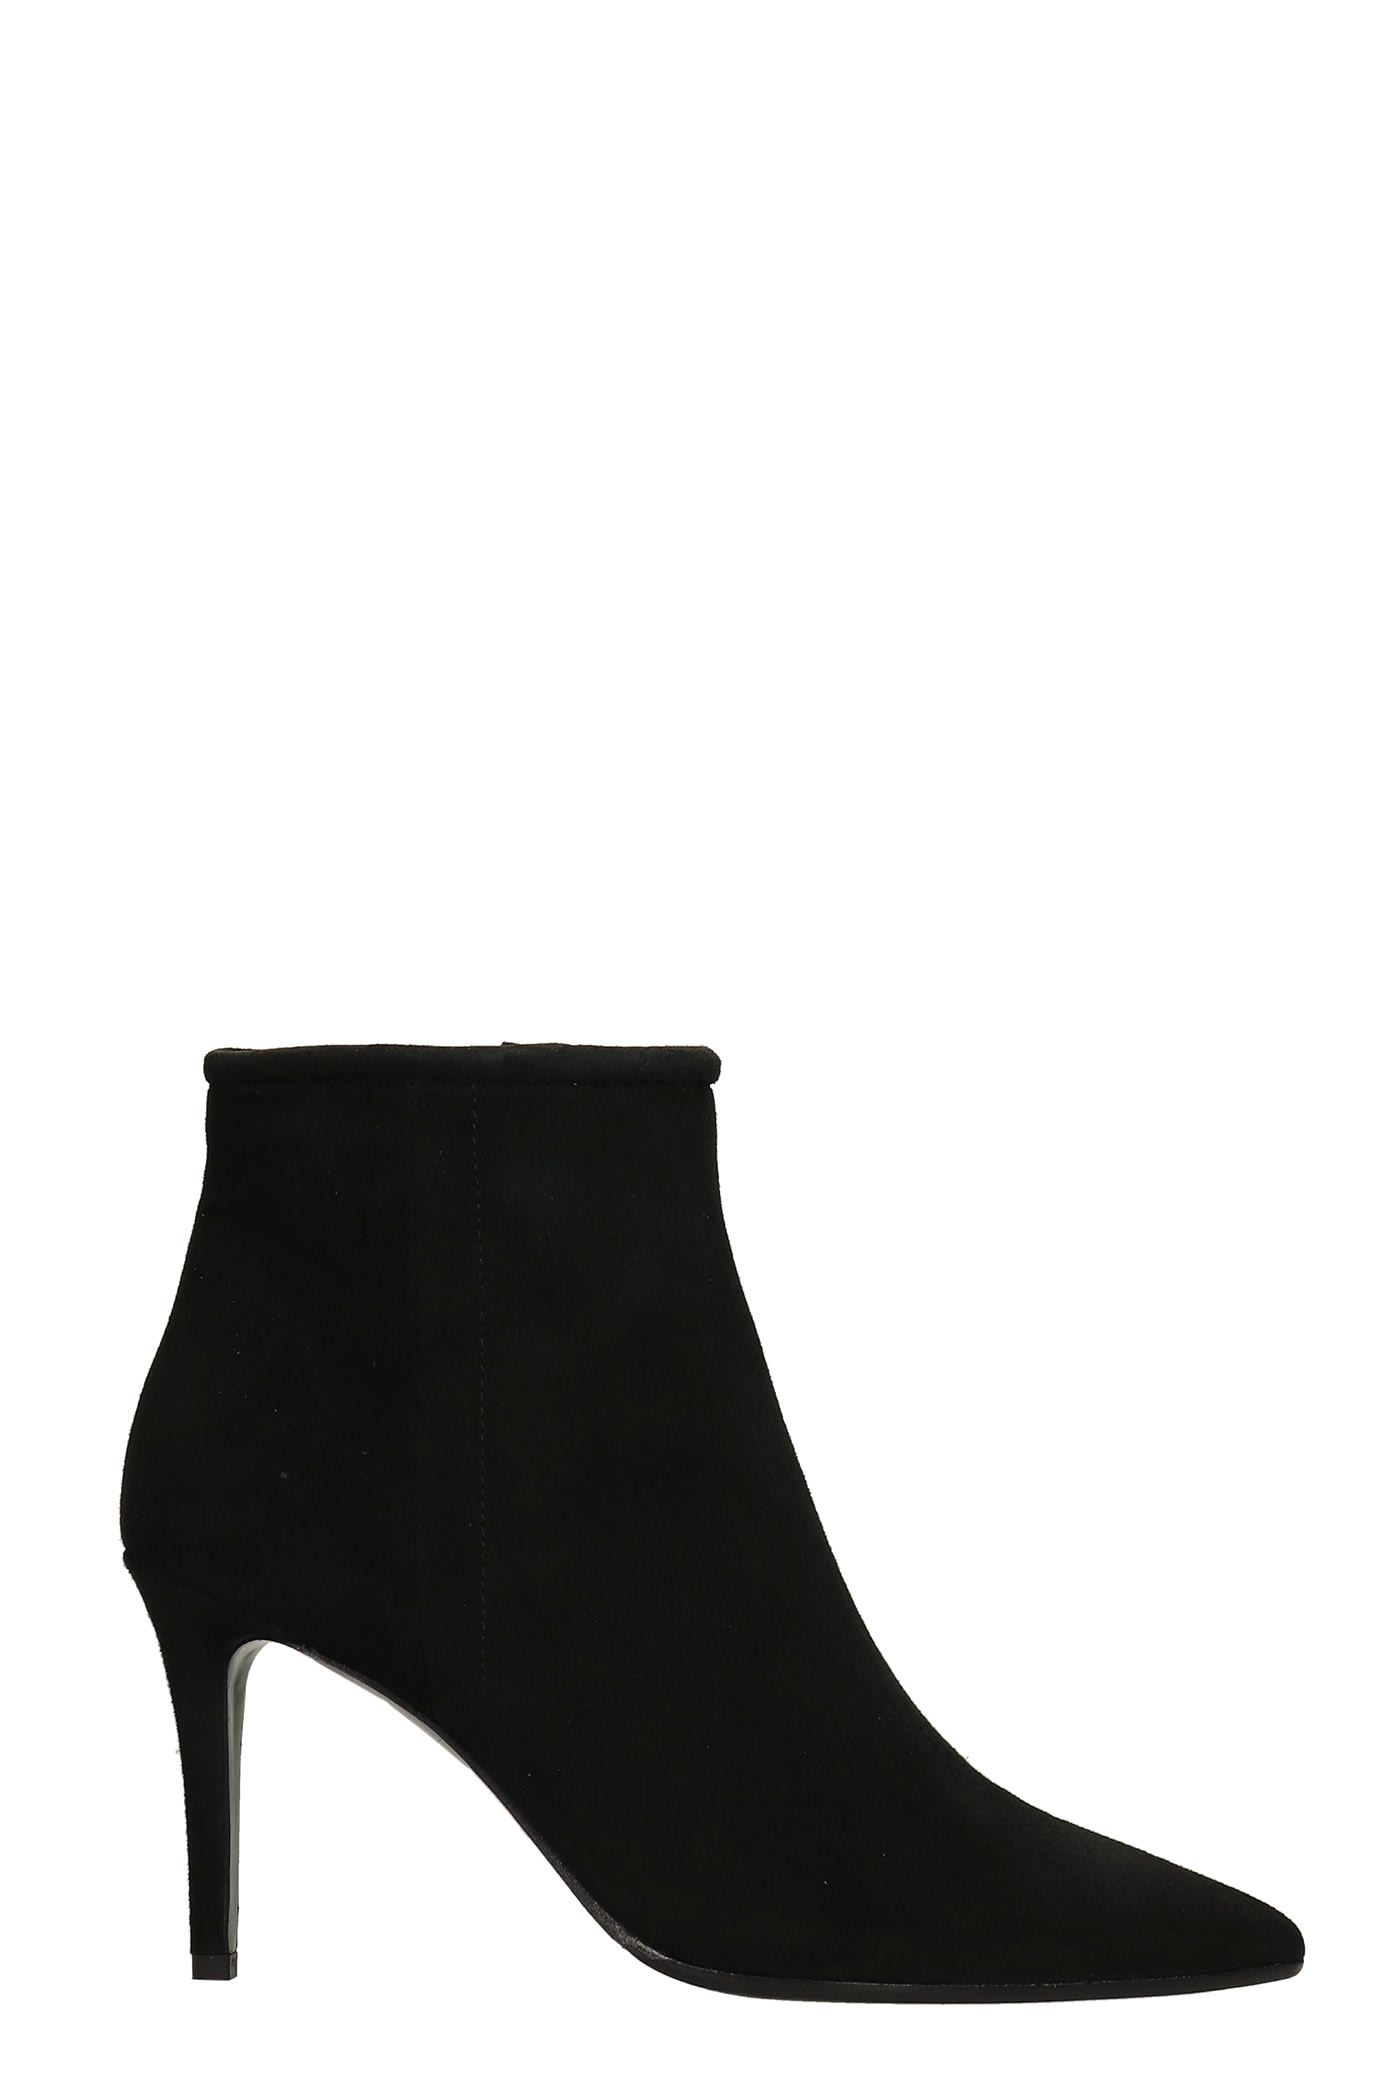 Fabio Rusconi High Heels Ankle Boots In Black Suede